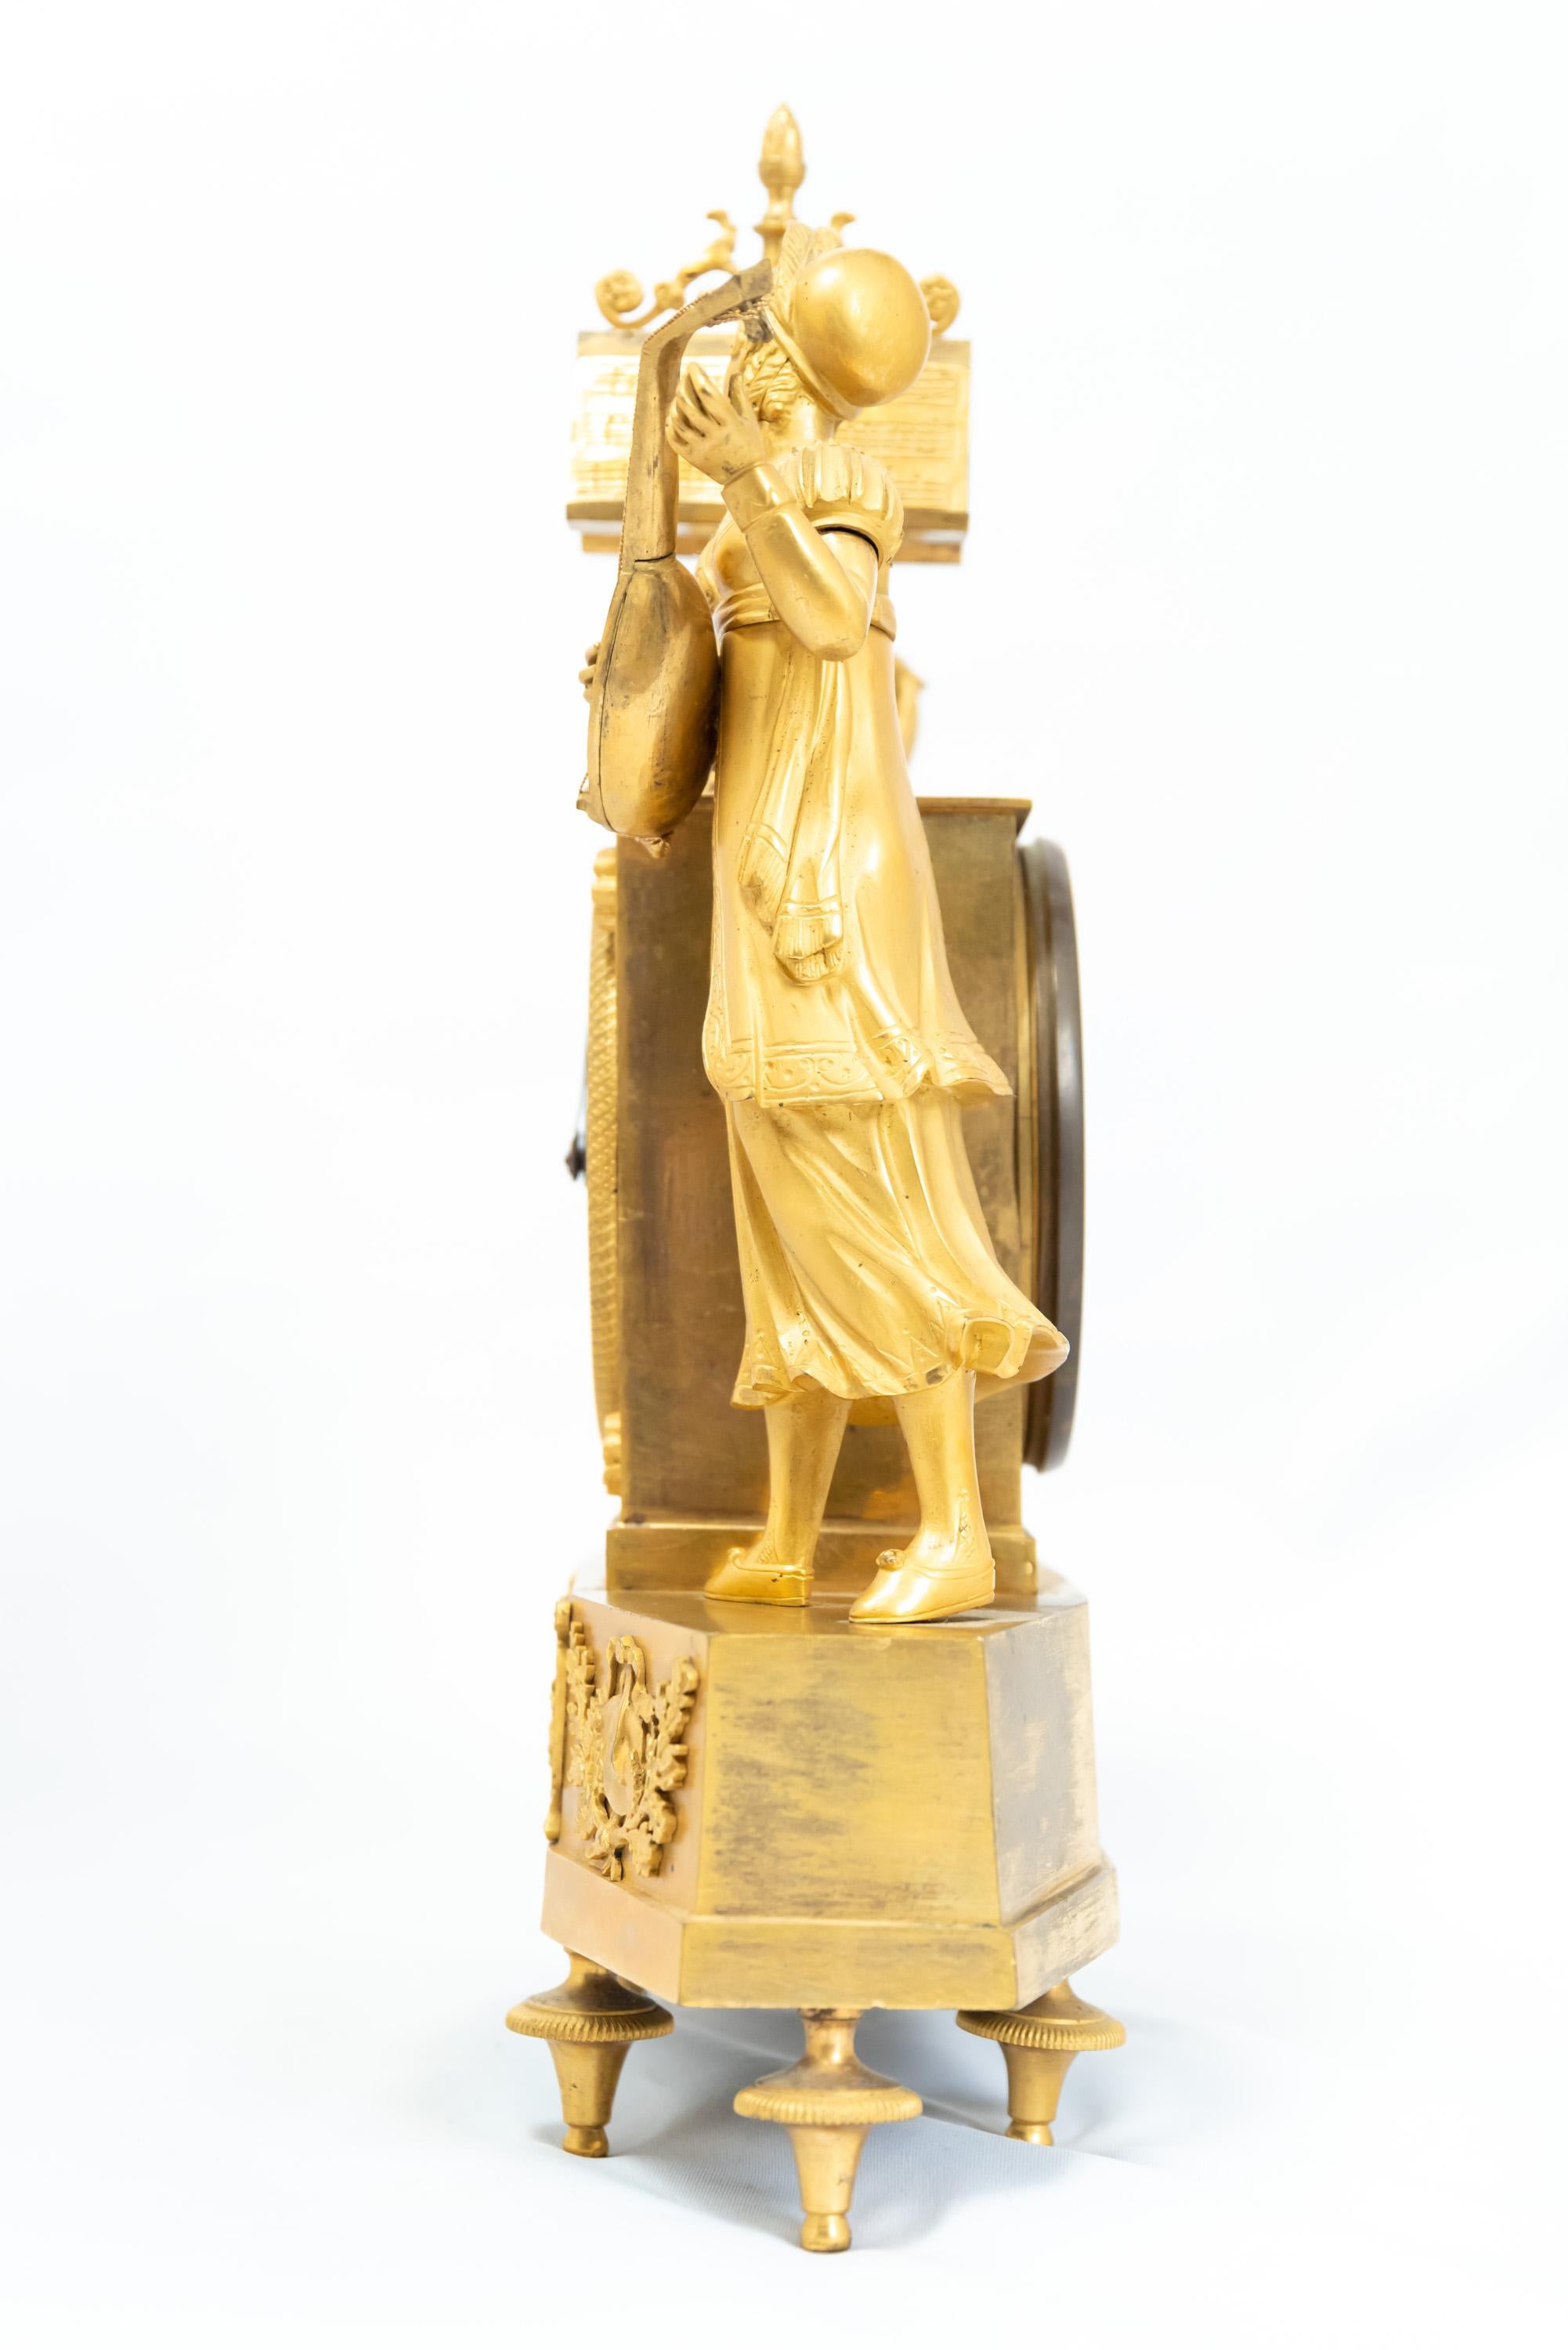 A French fire-gilt clock depicting a standing pair of figures in “troubadour” attire, Restauration Era, 1815-1830. The silk-thread mechanism is in good working condition with key and pendulum.